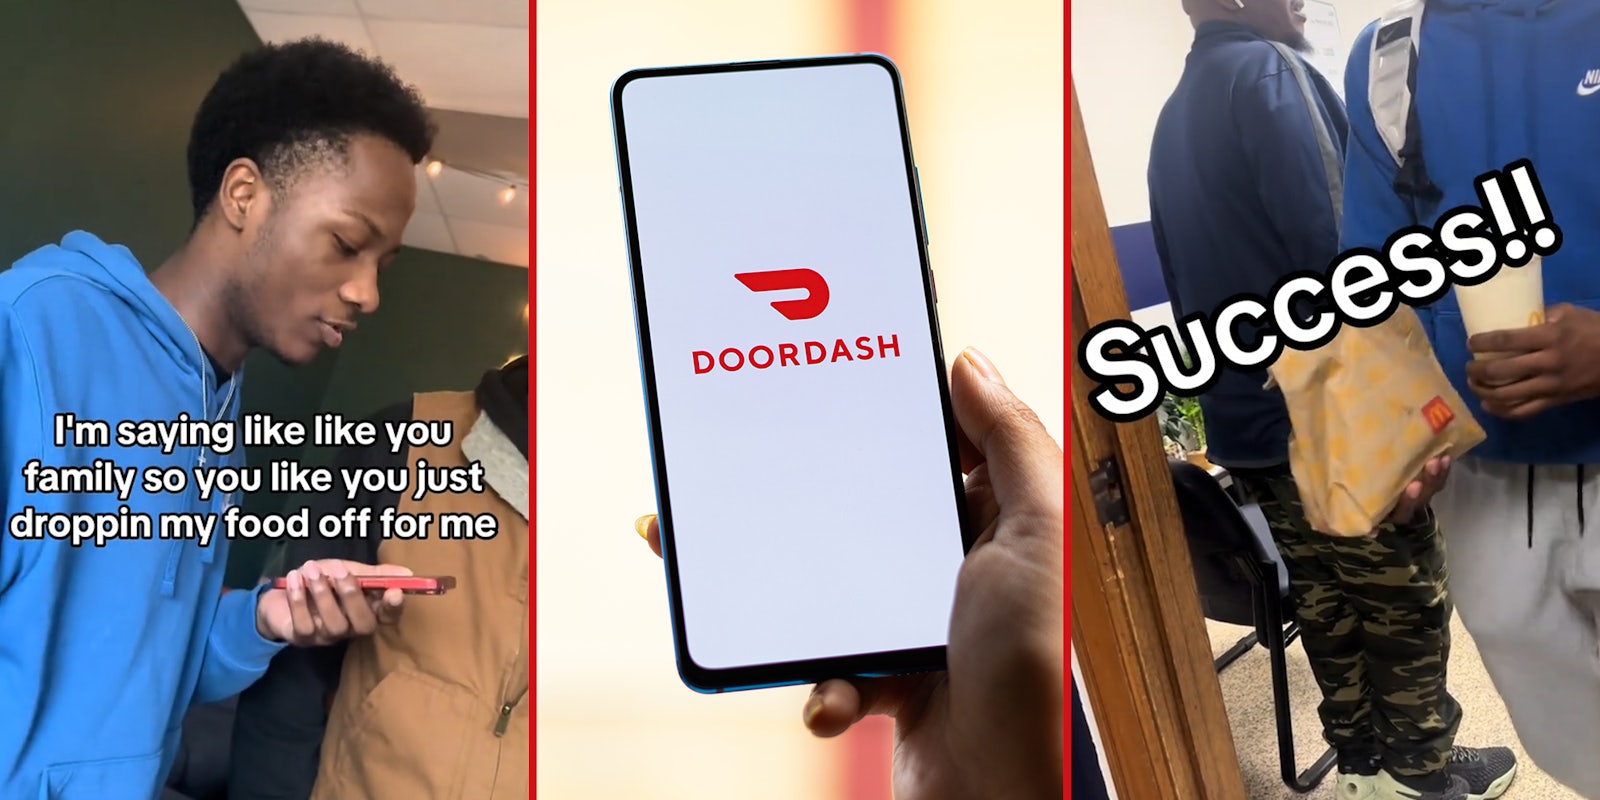 Student not allowed to DoorDash food to school. So he comes up with a creative solution